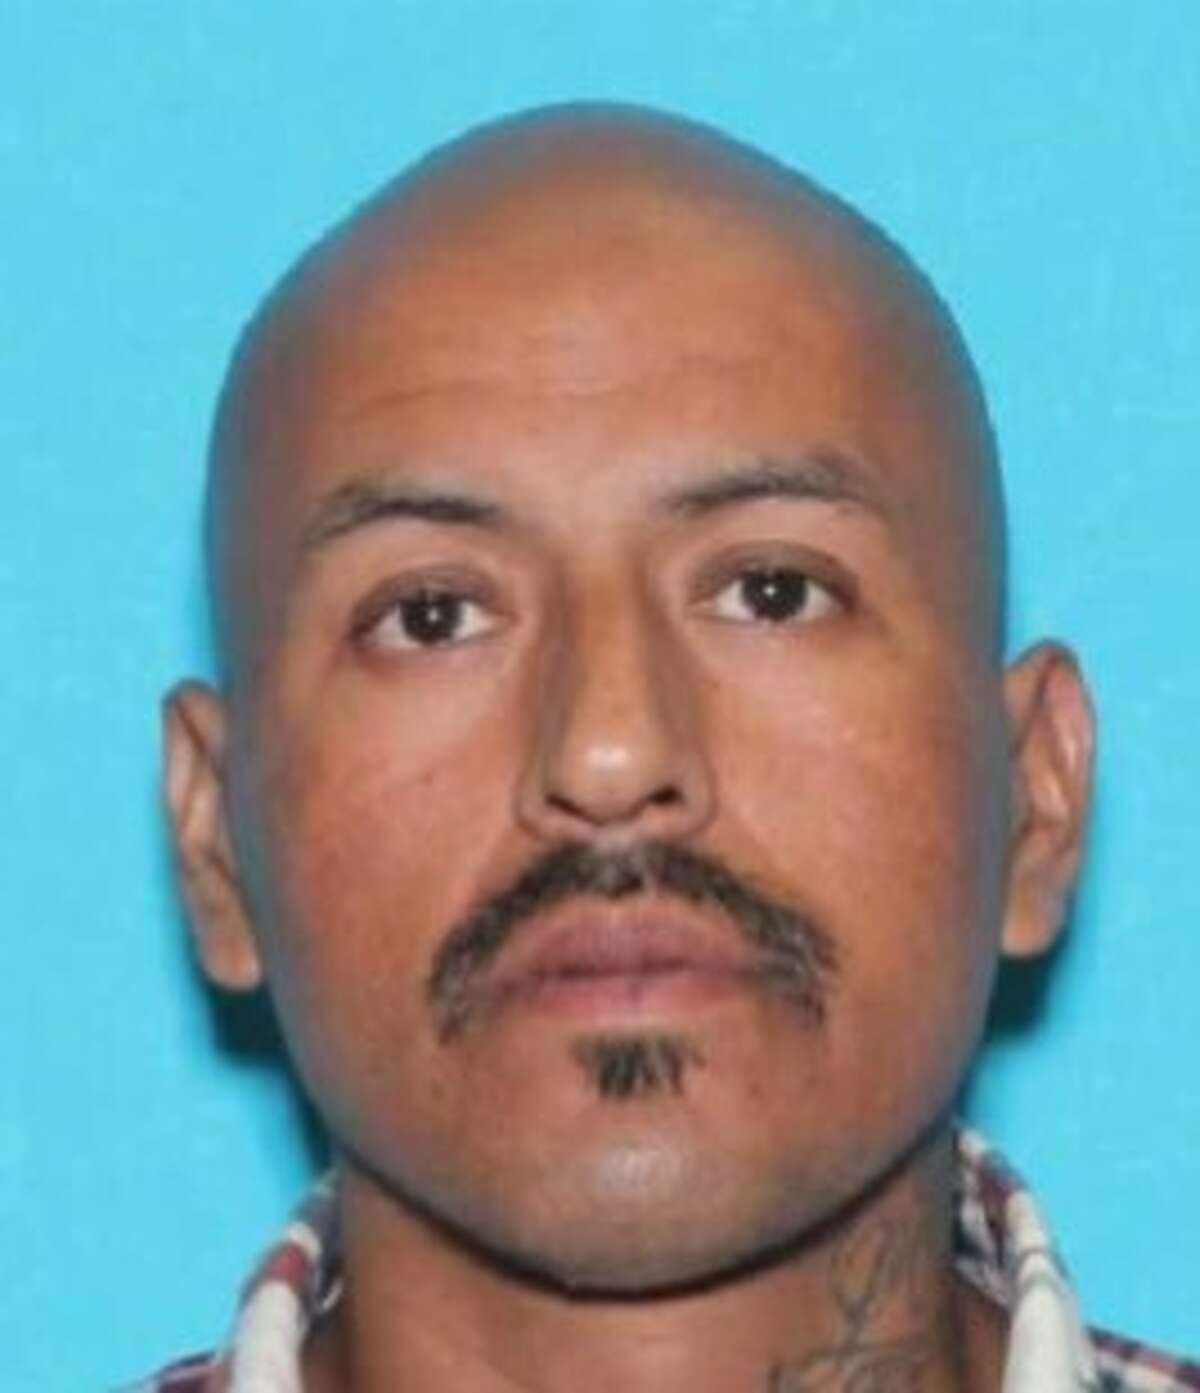 Juan Carlos Moreno, 42, was charged with felony possession of marijuana and engaging in organized criminal activity.